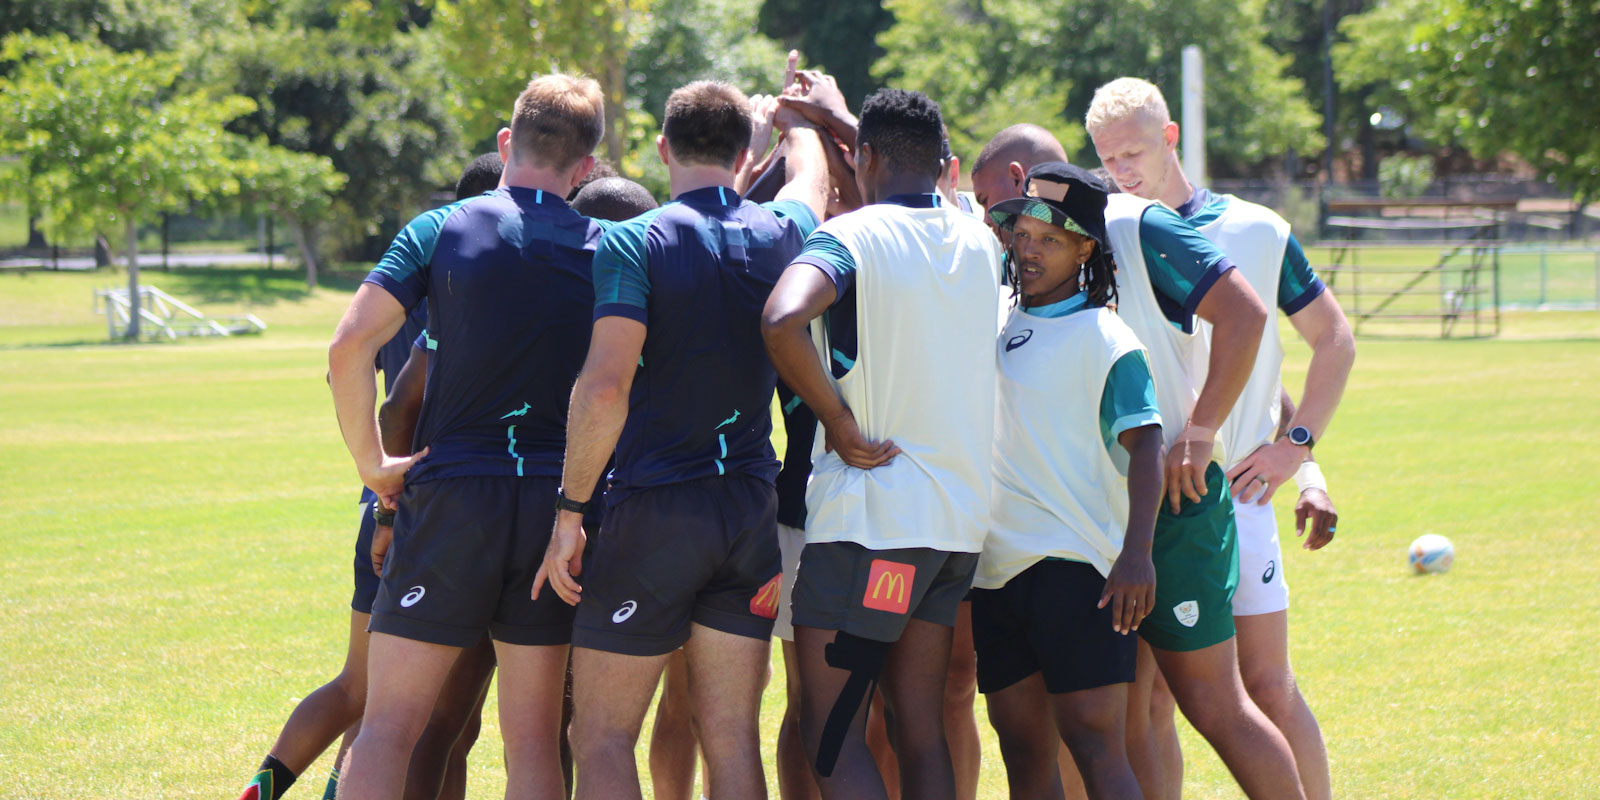 The Blitzboks completed training in South Africa on Friday.